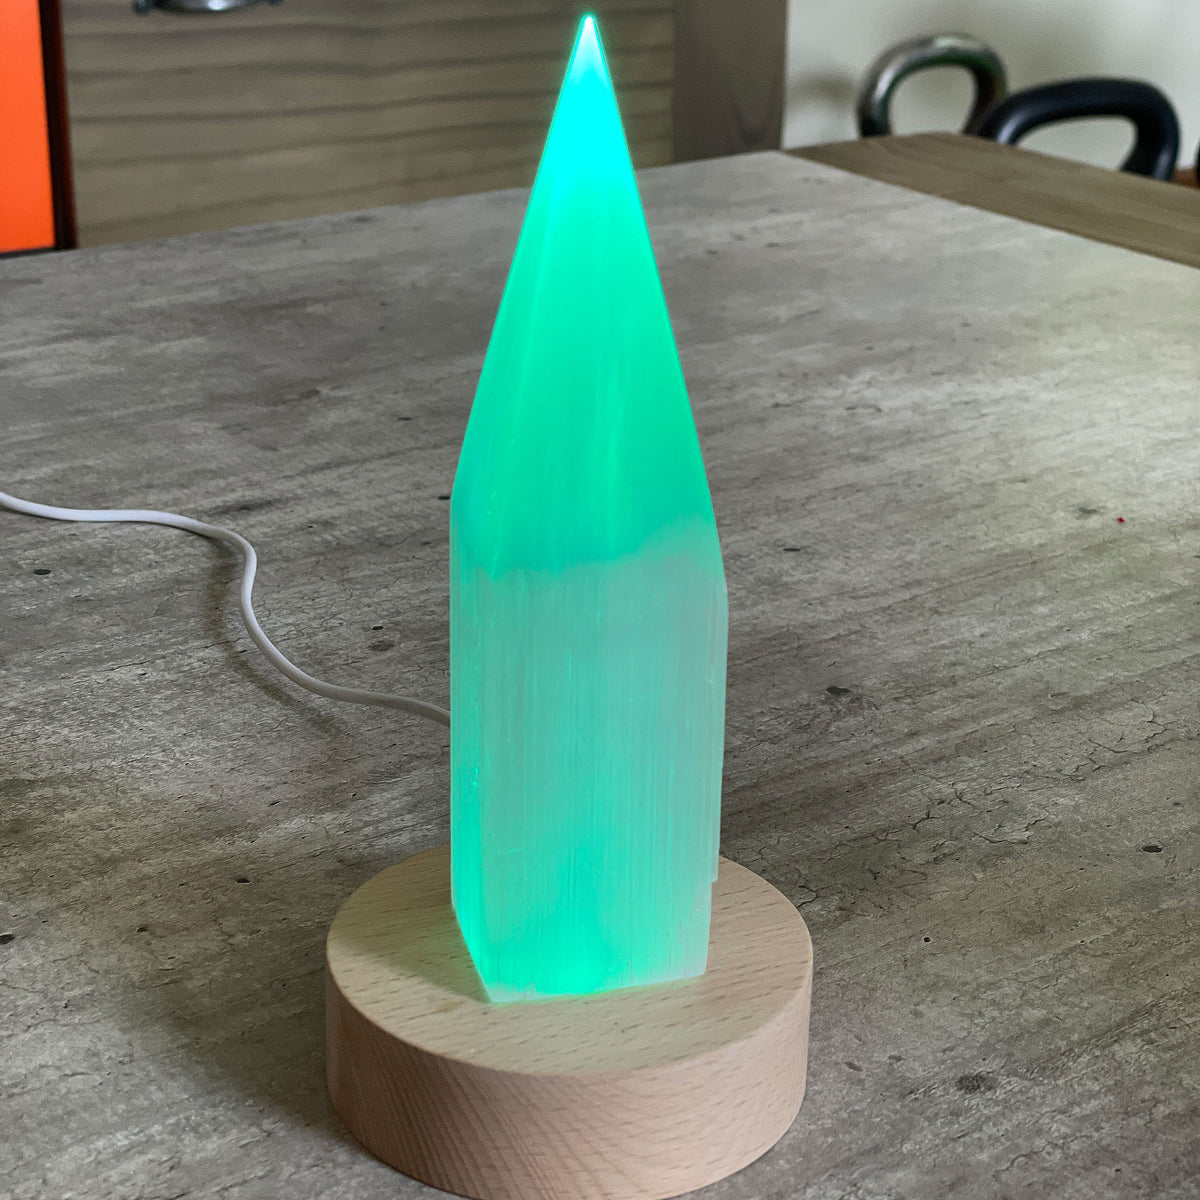 Selenite Lamp - Pencil Point Small - Selenite is a beautiful and versatile crystal that offers numerous benefits, making it a popular choice for both decor and holistic purposes. Its natural beauty and unique translucent appearance make it an eye-catching addition to any home. Selenite emits a soft and warm glow, which makes it an excellent choice for a night light.